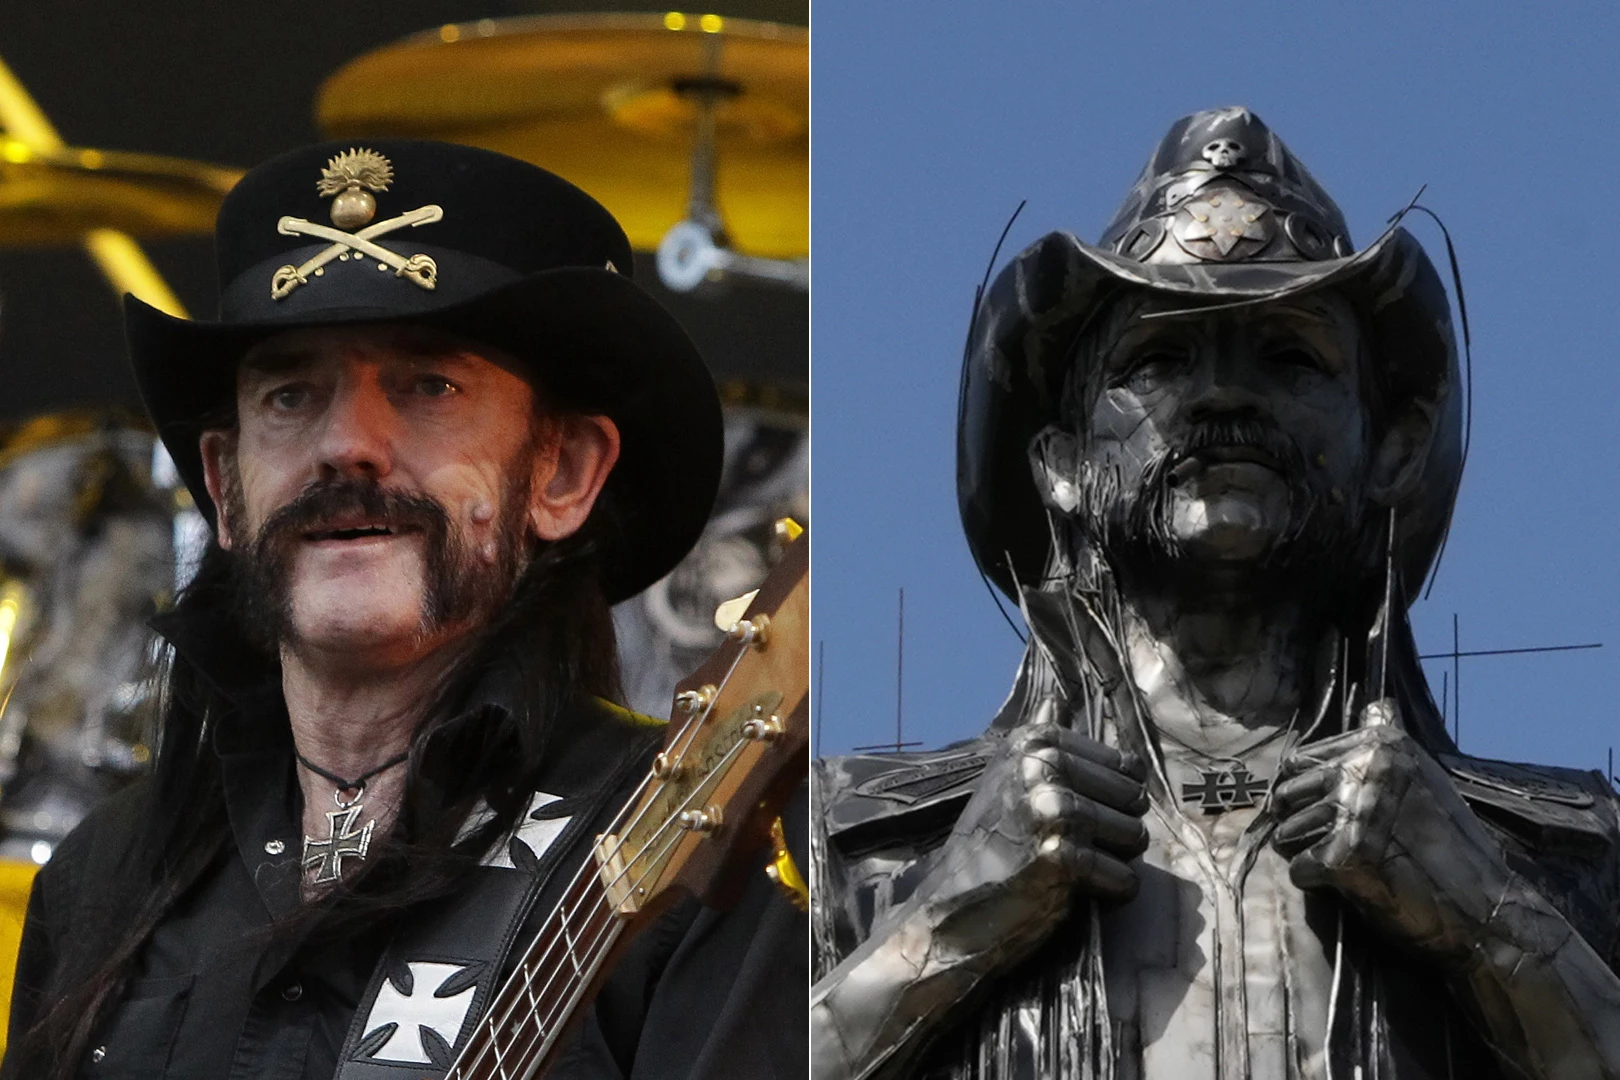 Lemmy Kilmister Ashes Enshrined With Hellfest Statue in Ceremony